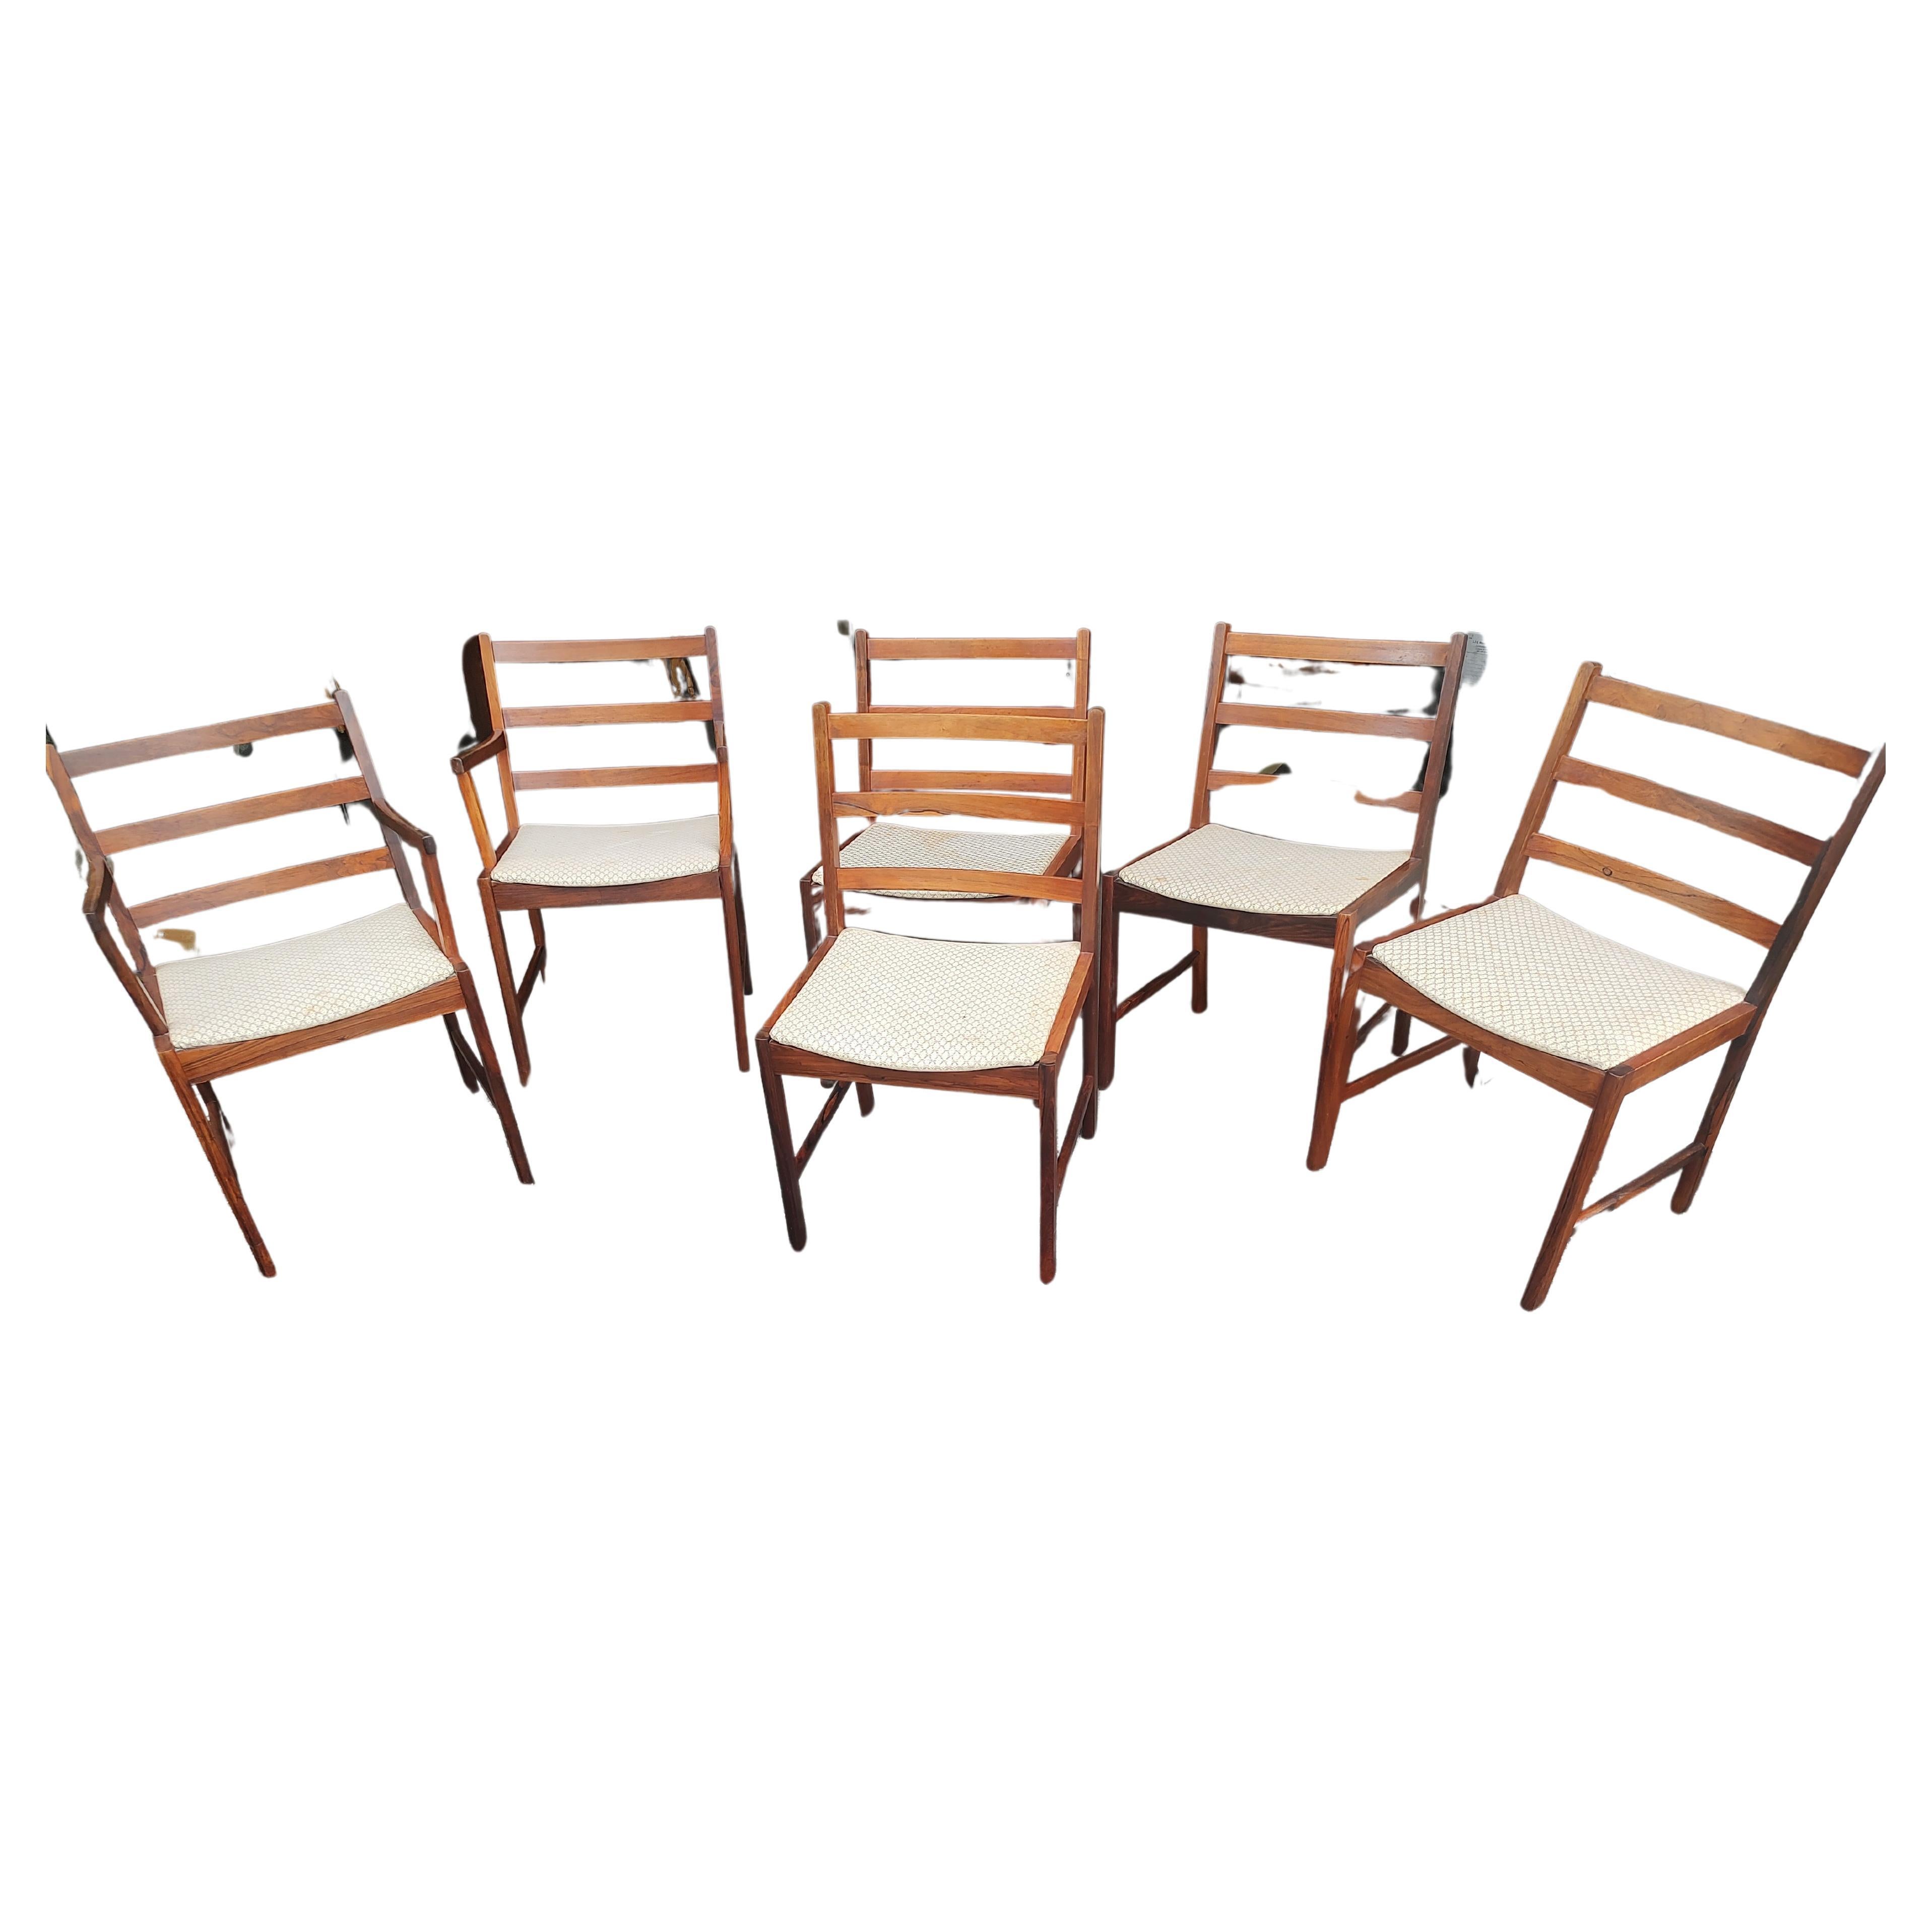 Fantastic set of very elegant and simple dining chairs with ladder backs and generous seats created from Rosewood. Late sixties and in excellent vintage condition with minimal wear. Seats need recovering, four screws holding them in place makes for